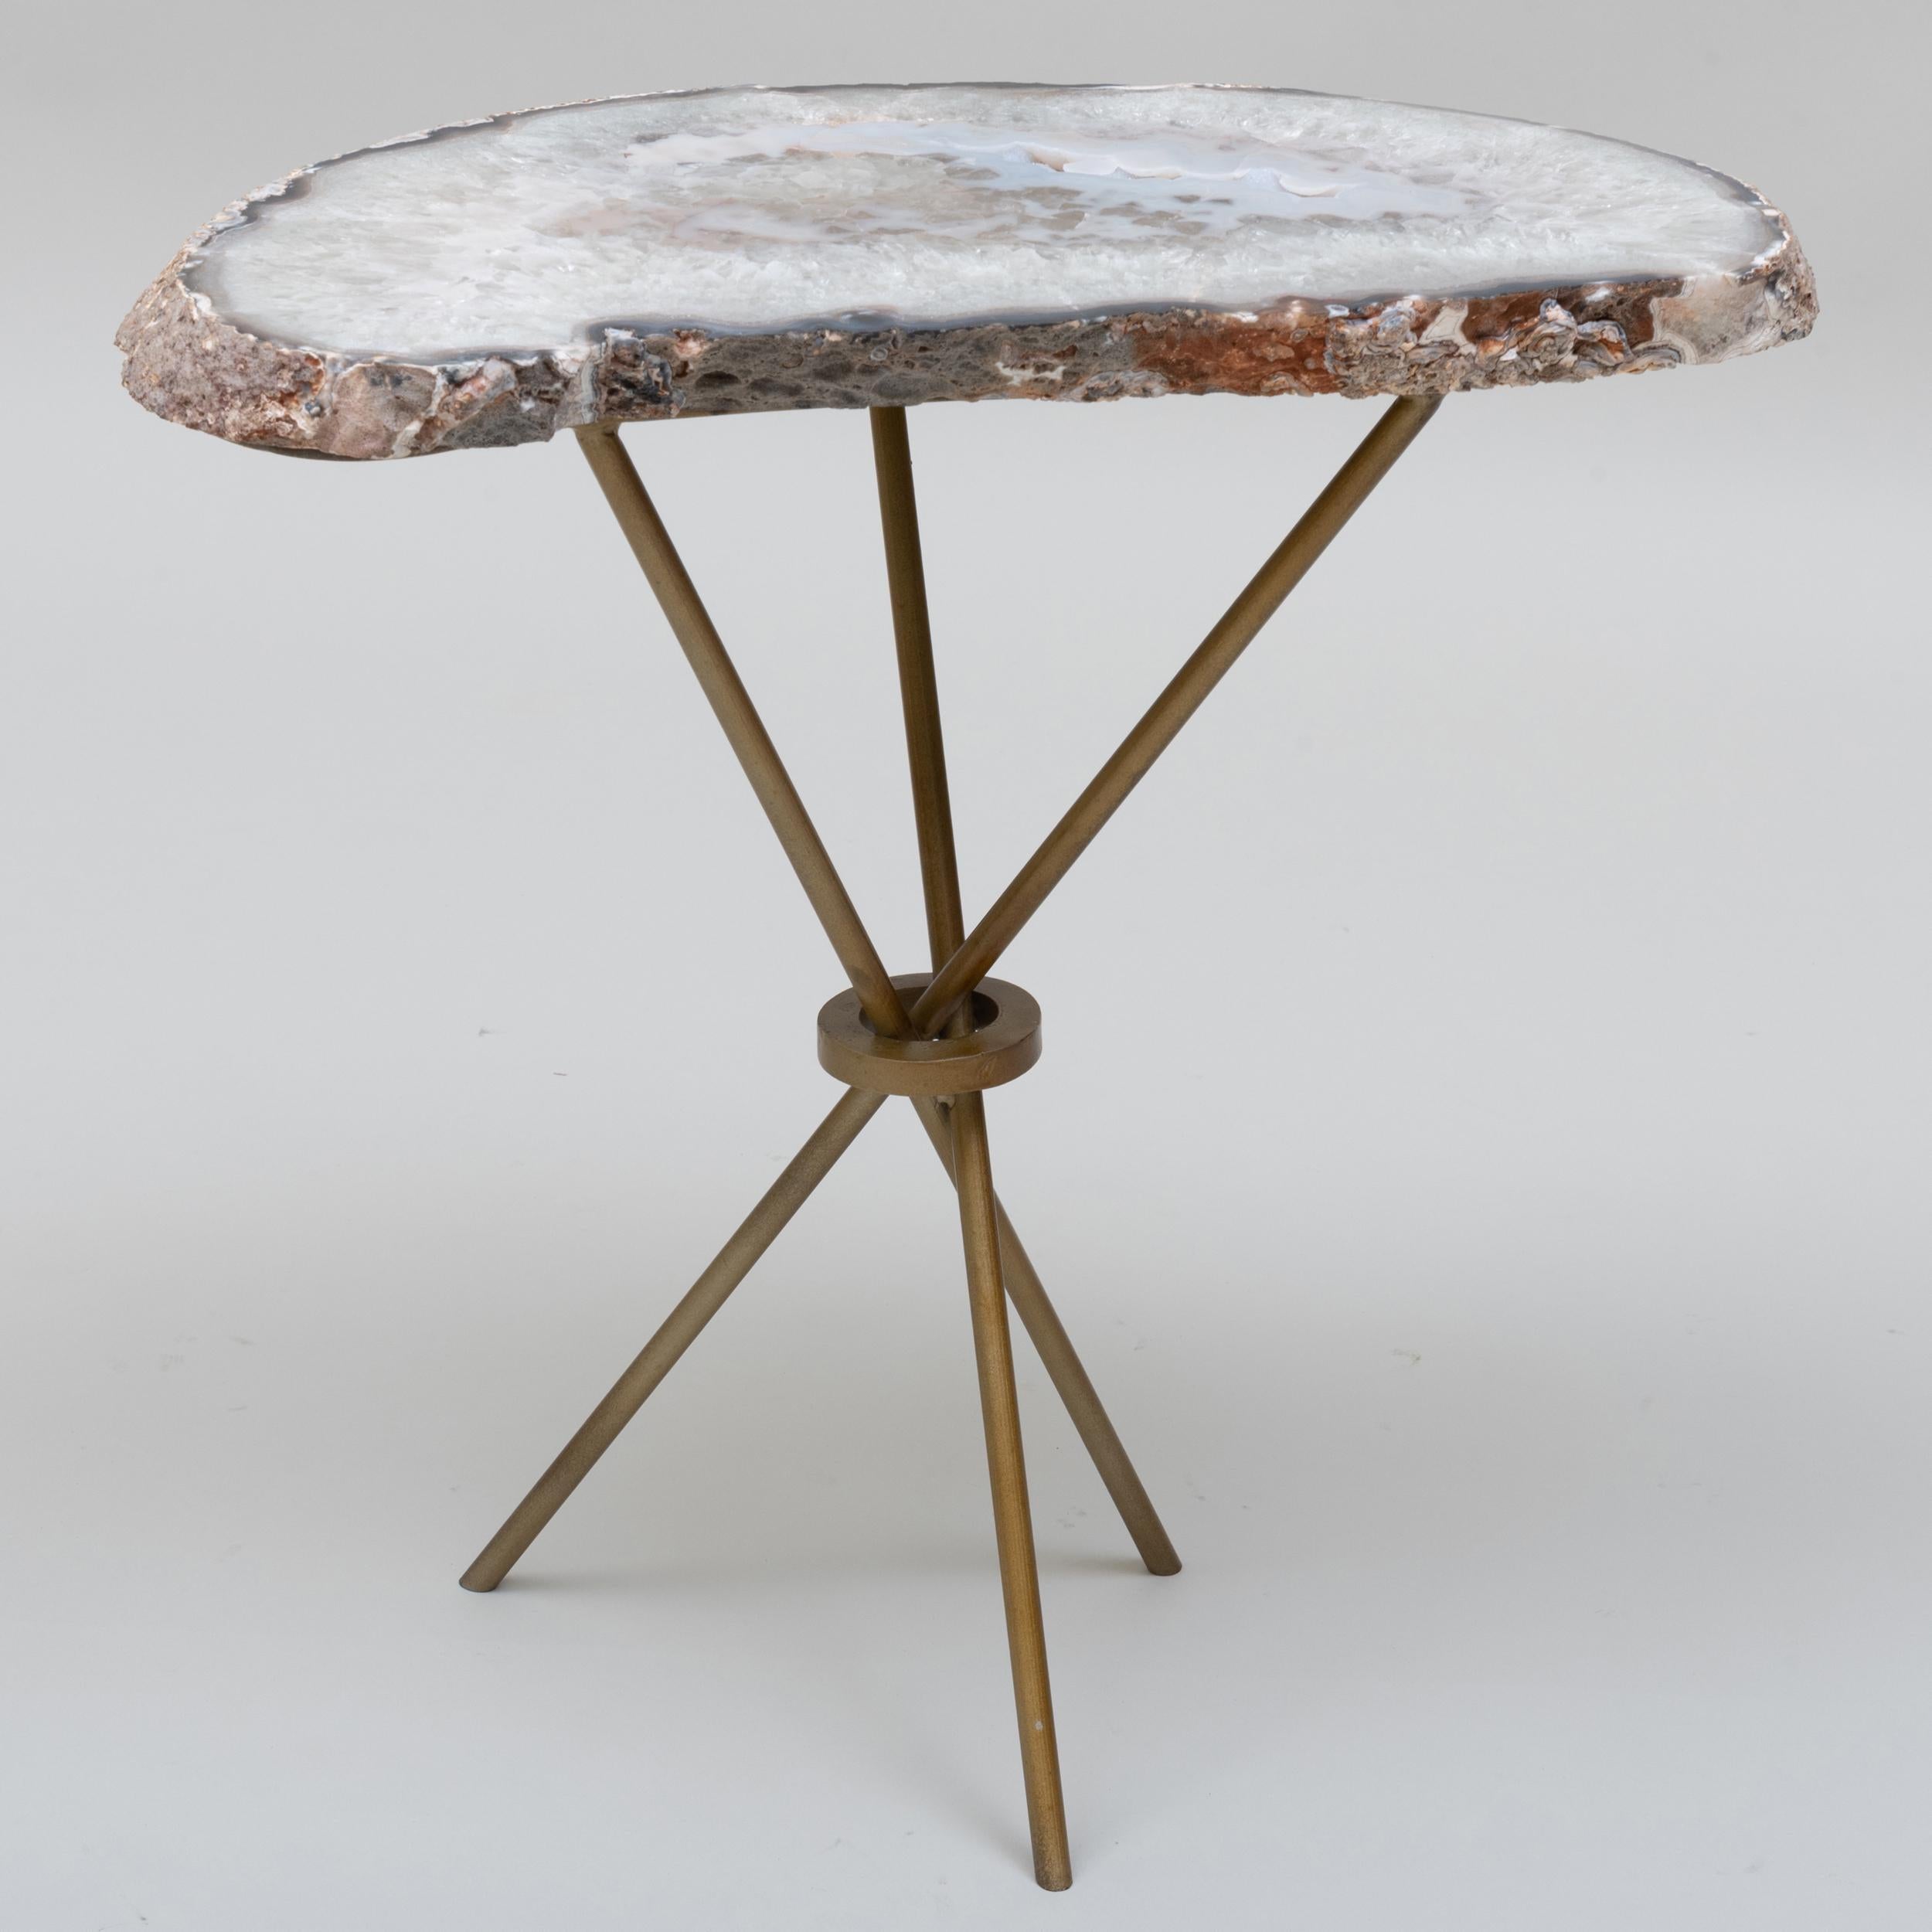 Bronze finished tripod side table with a polished natural Geode slab featuring white, grey and cream crystal inclusions/formations.